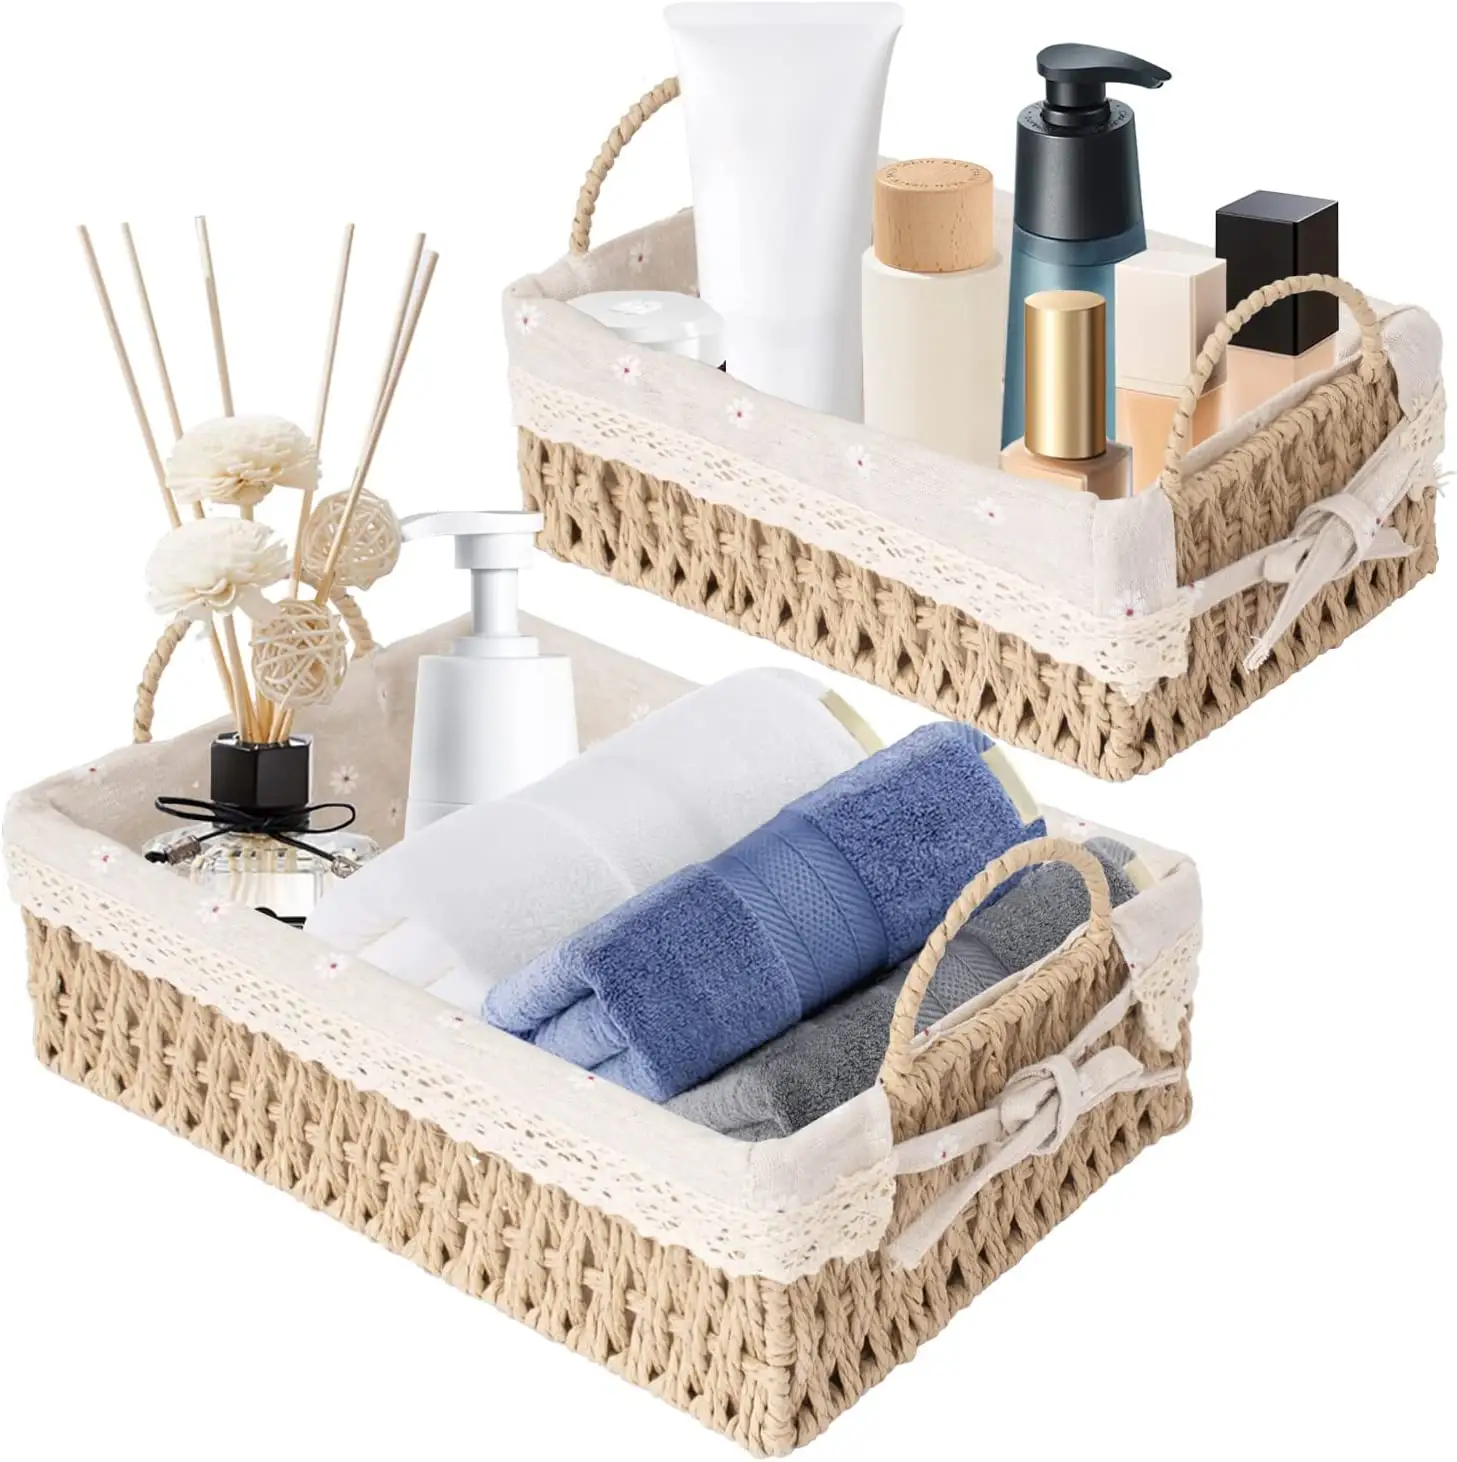 Paper Baskets for Shelves Nesting Decorative Woven Basket Set for Organizing Handmade Storage Baskets with Handles and Liners